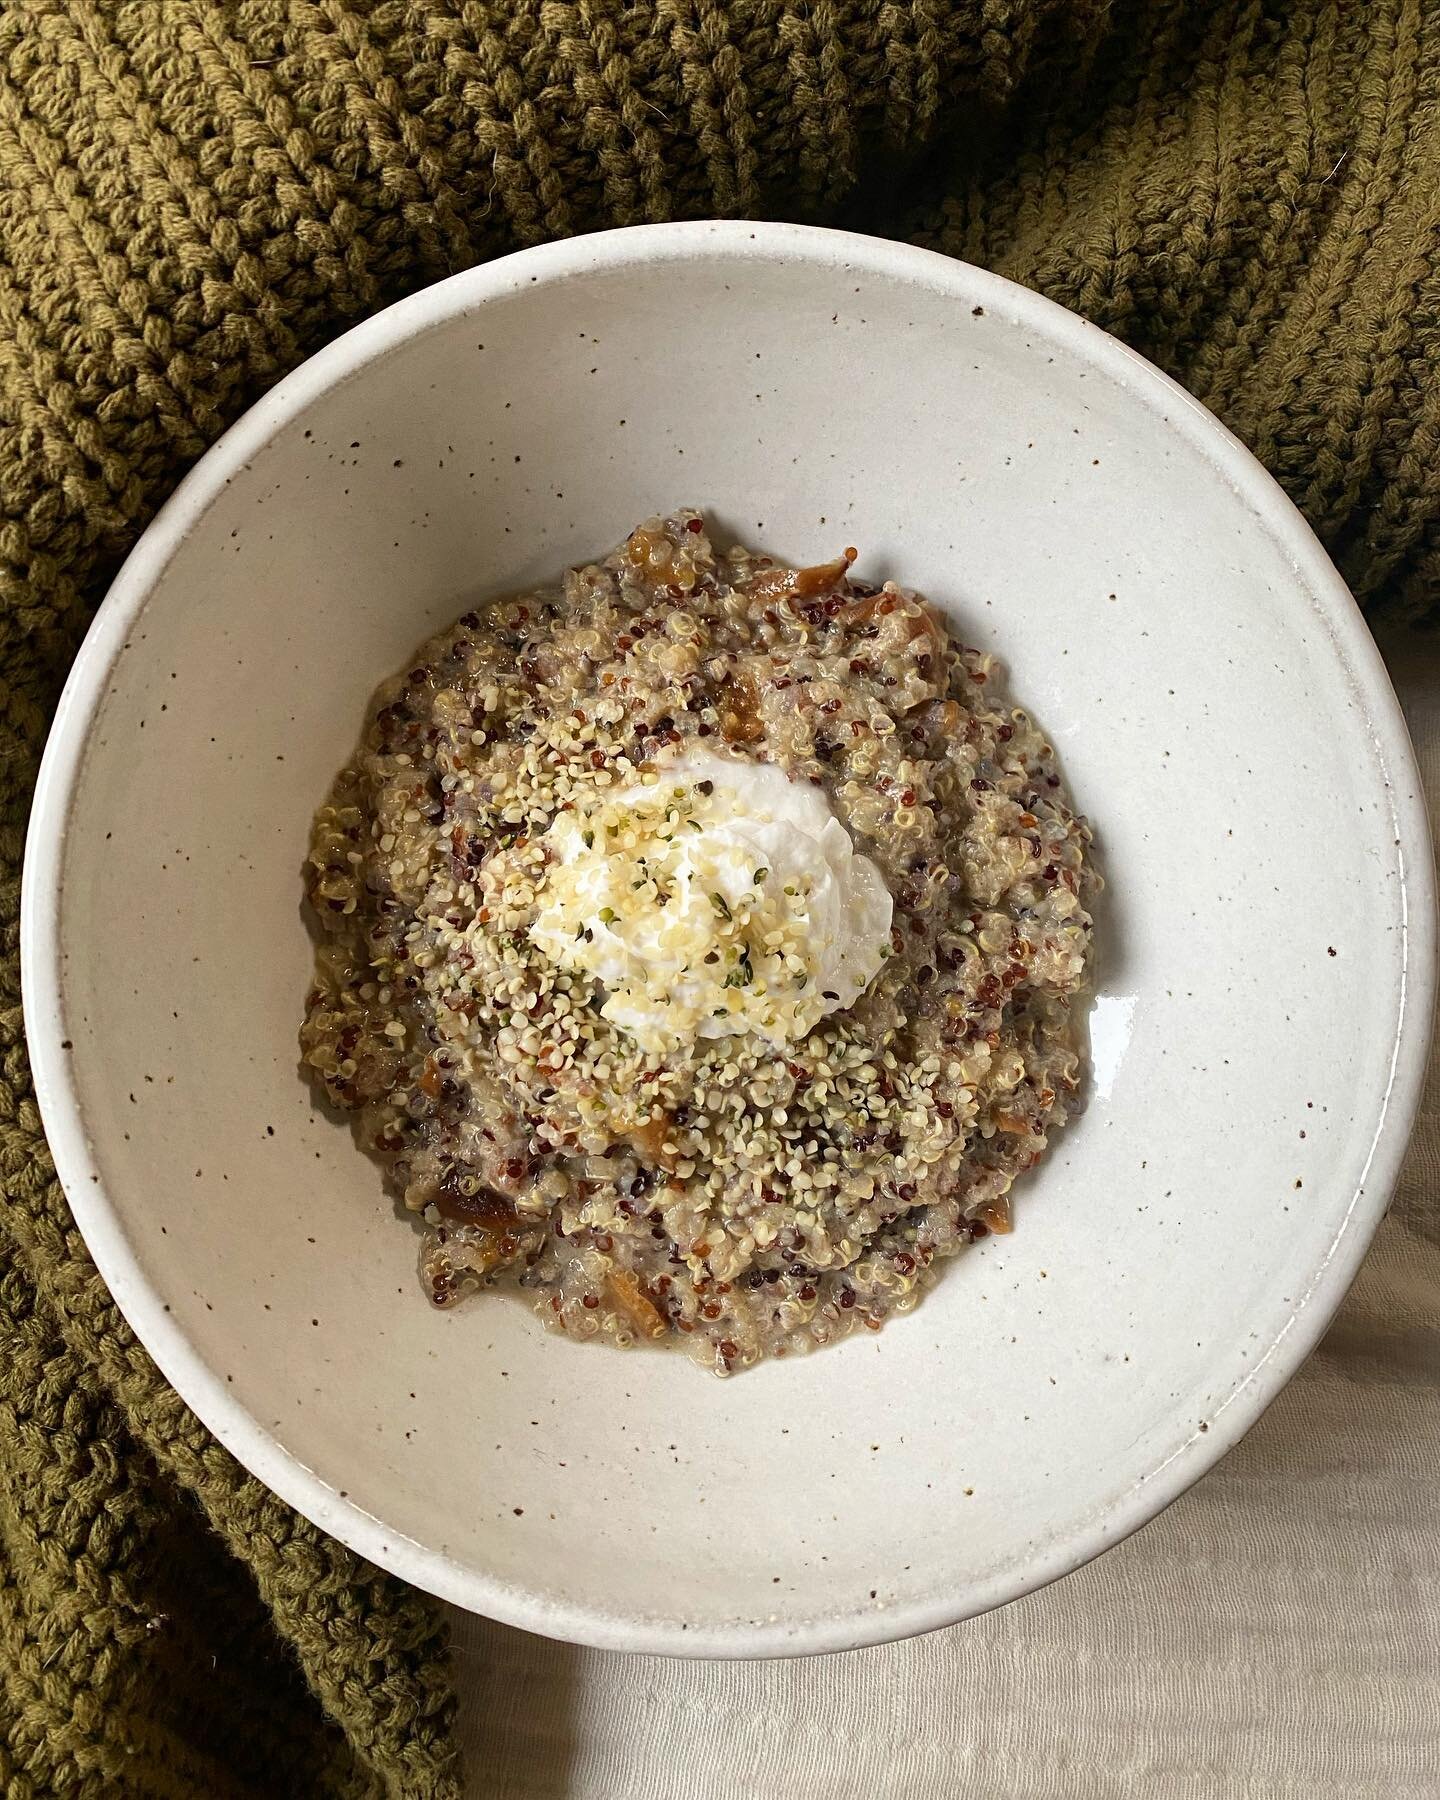 Recipe | Quinoa porridge 

Ingredients:
1/2 cup cooked quinoa 
1/4 - 1/2 cup milk of choice
1 Tbsp probiotic yoghurt or kefir
Pinch cinnamon
Fruit e.g. mashed banana, stewed apple or 1 dried fruit finely sliced 
Hemp seeds 

Method:
1. Place the cook